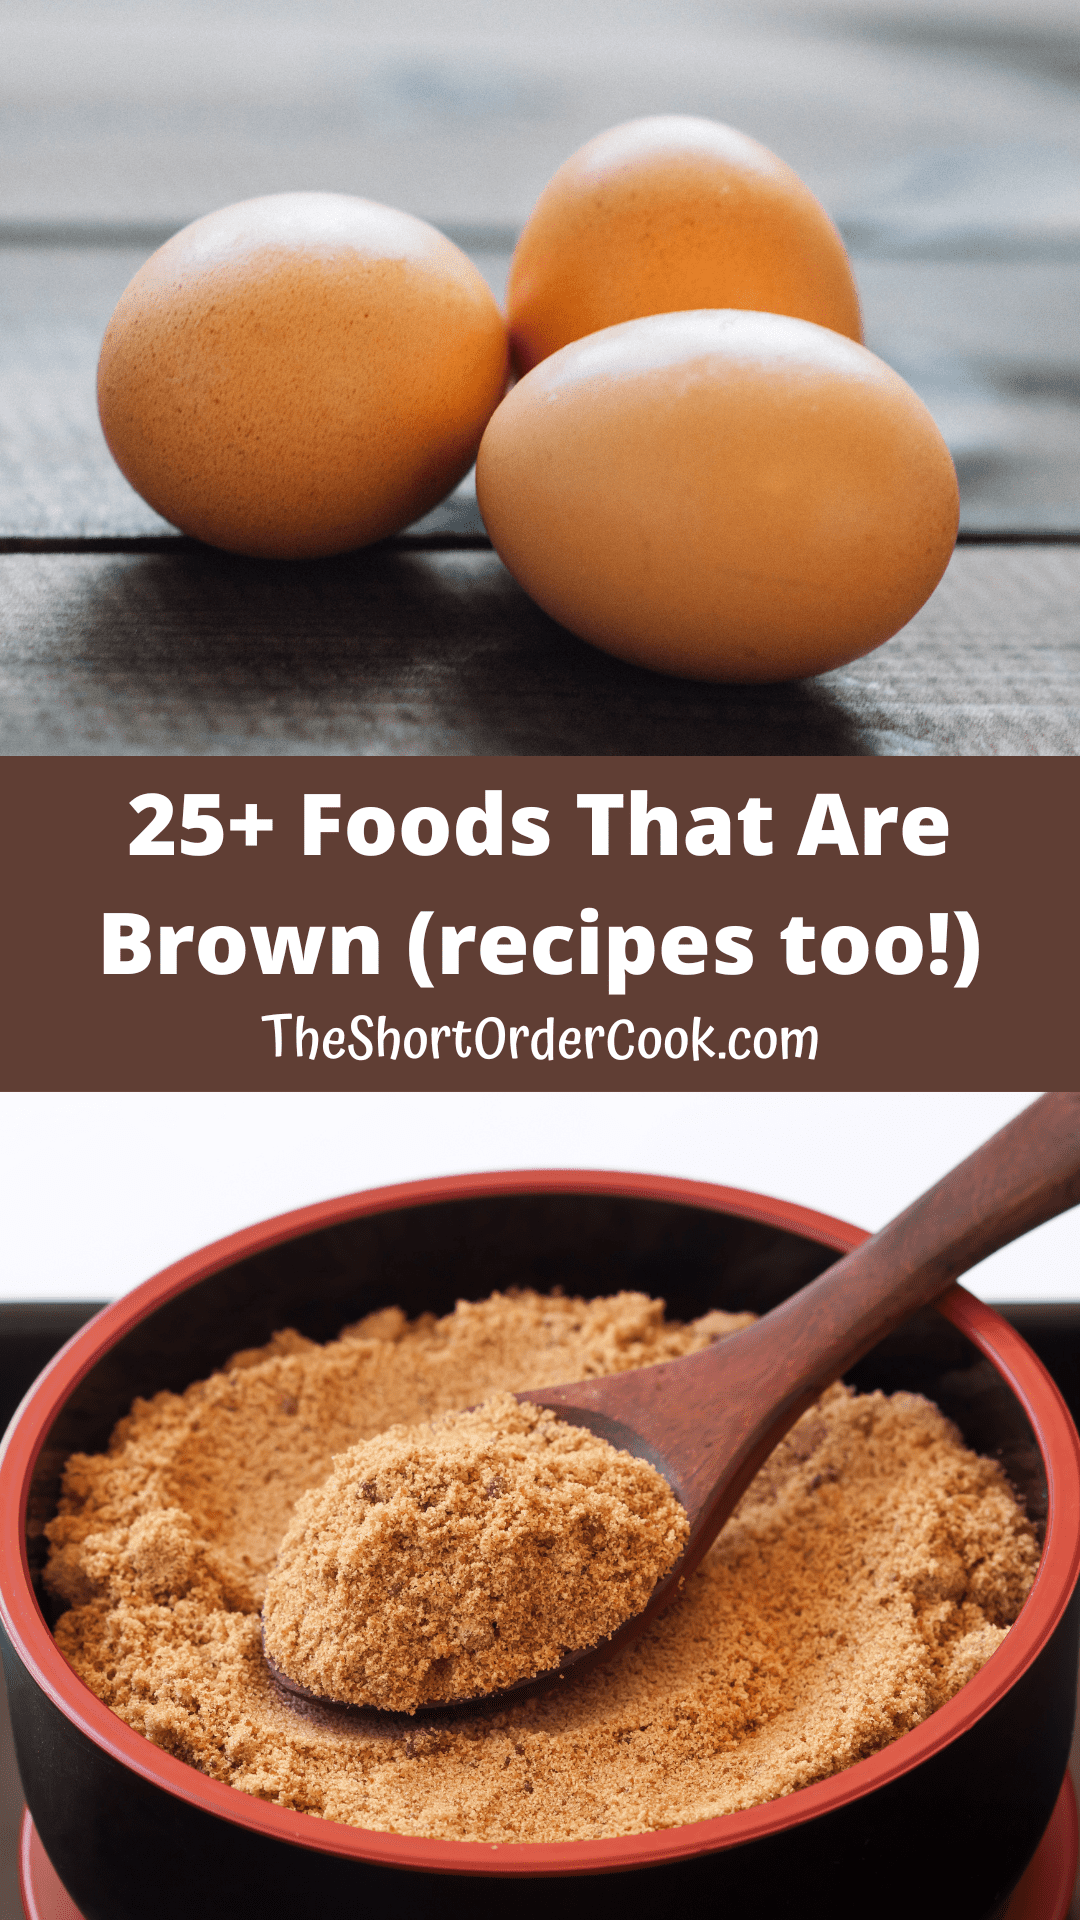 Images for brown sugar and brown eggs.